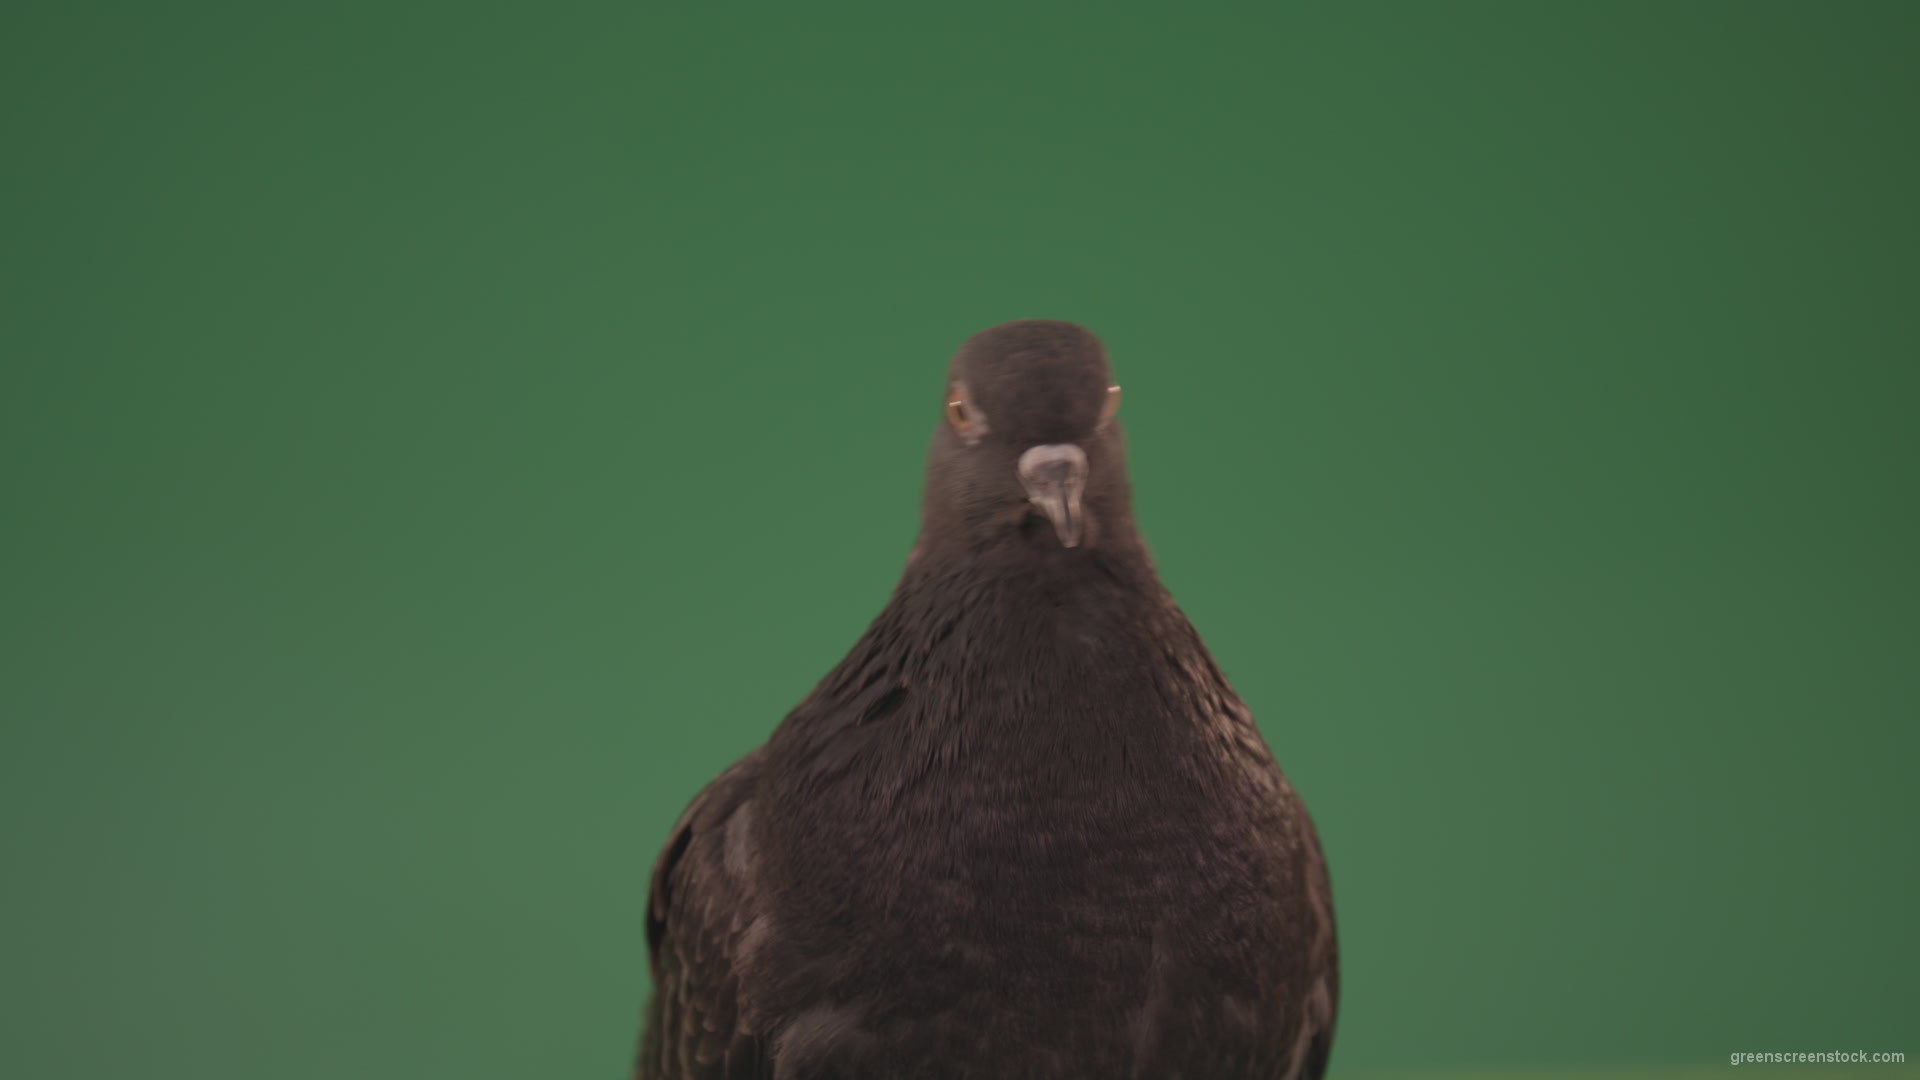 Bird-of-pigeon-is-sitting-on-the-house-and-looking-at-the-city-isolated-on-chromakey-background_007 Green Screen Stock